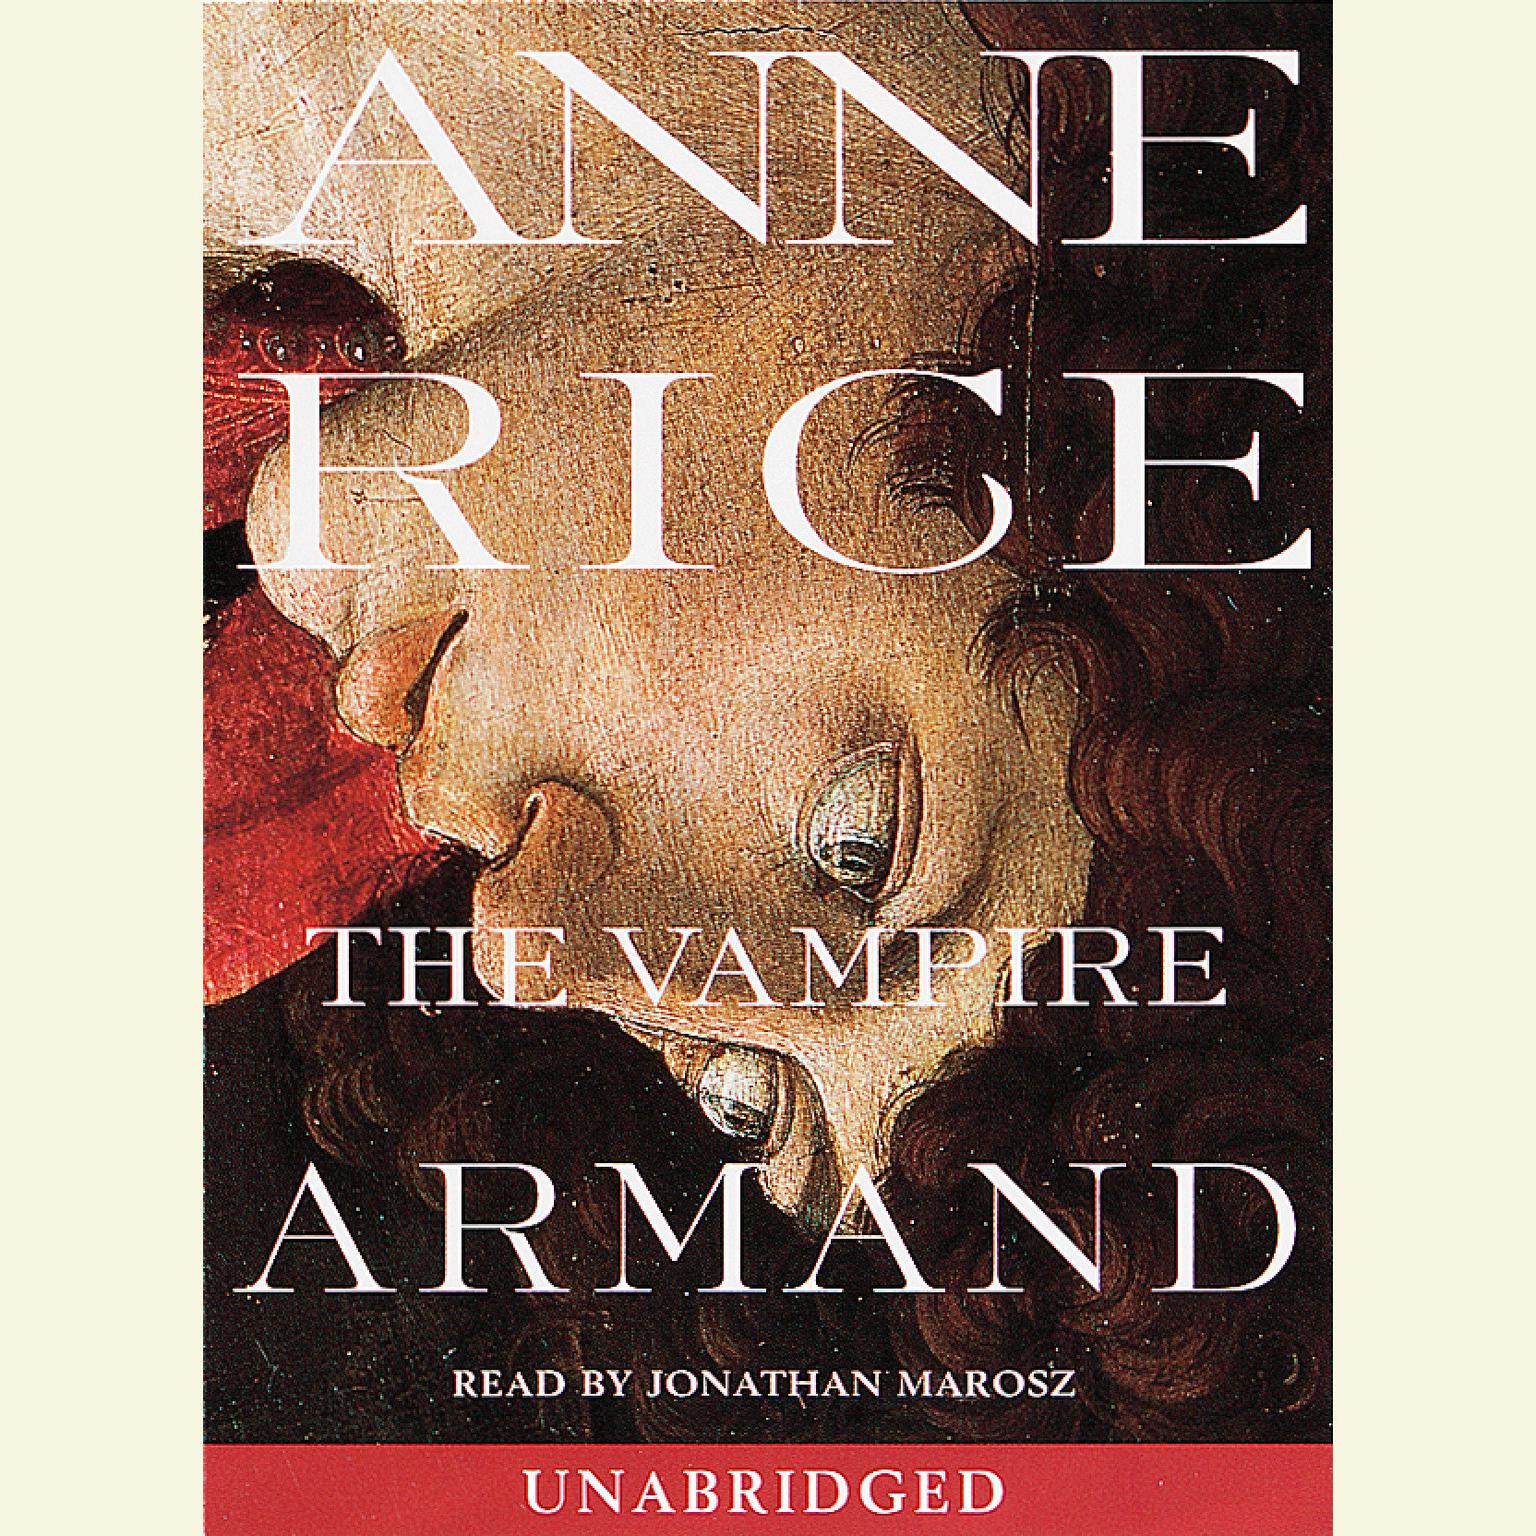 The Vampire Armand: The Vampire Chronicles Audiobook, by Anne Rice